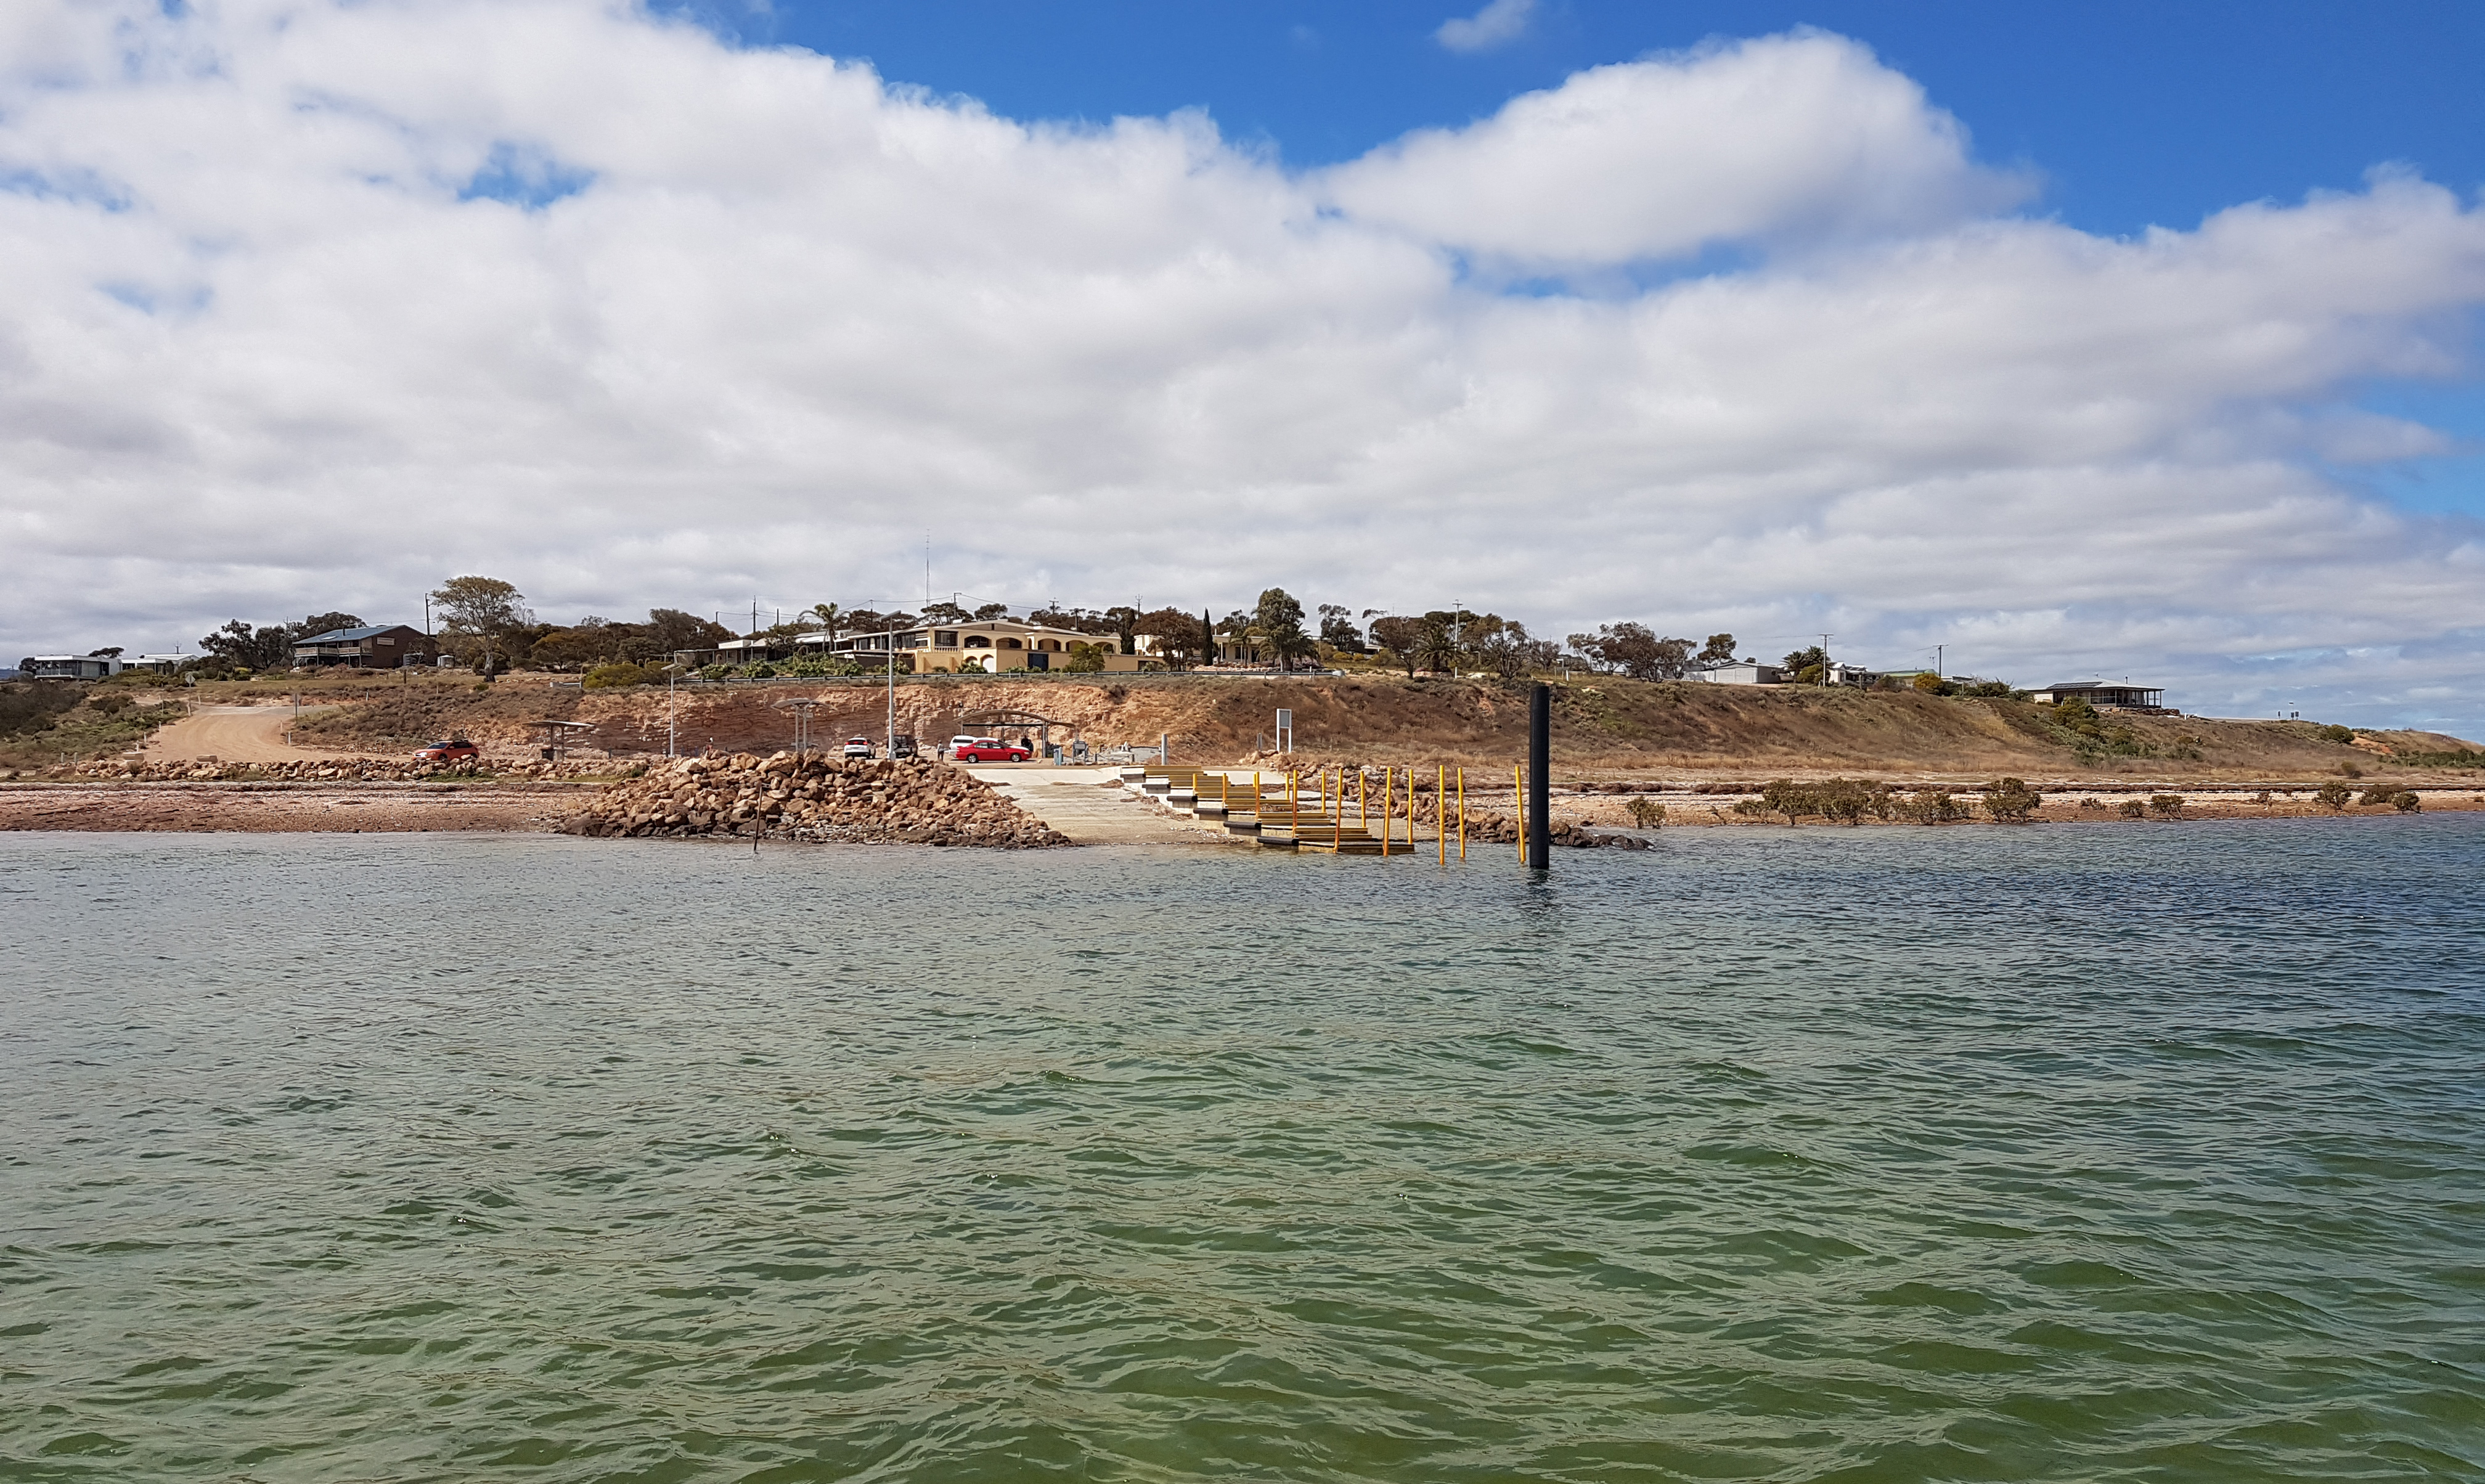 A picture of a boat ramp taken from the water. The ramp appears to be concrete with yellow poles on one side. There is a car park and homes on a hill in the background.